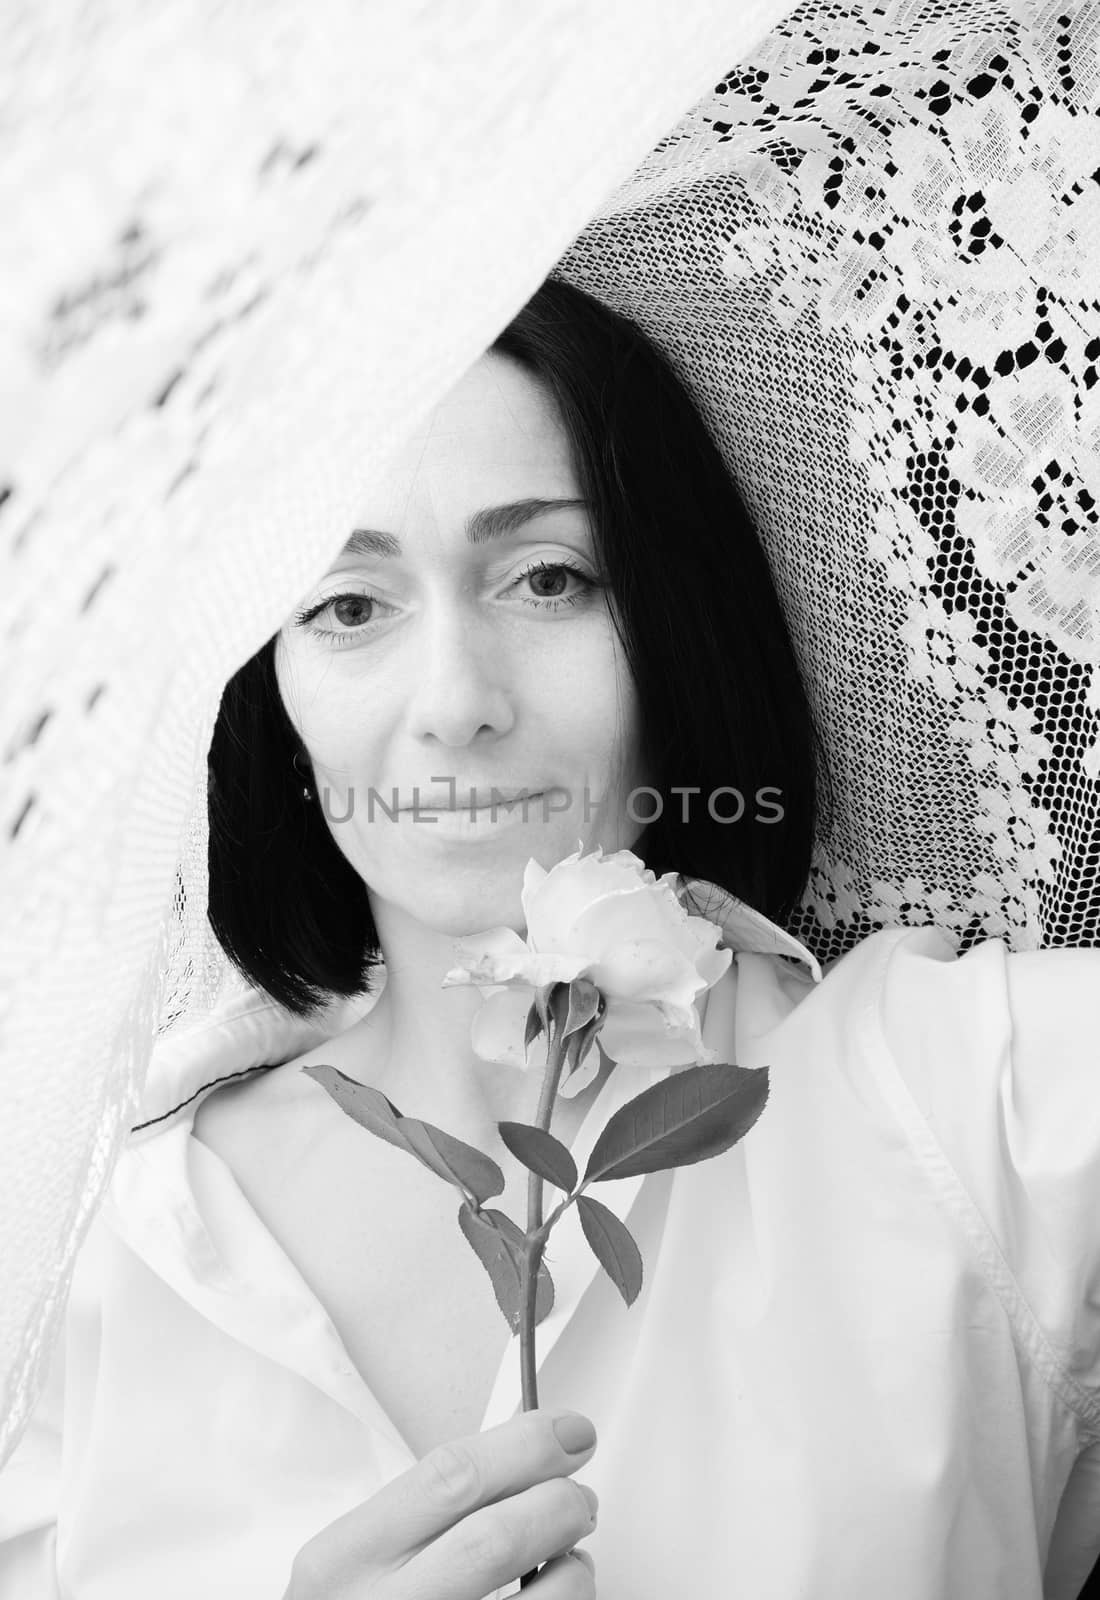 portrait of a young woman with a white rose in her hands surrounded by lace white curtains, black and white tinting